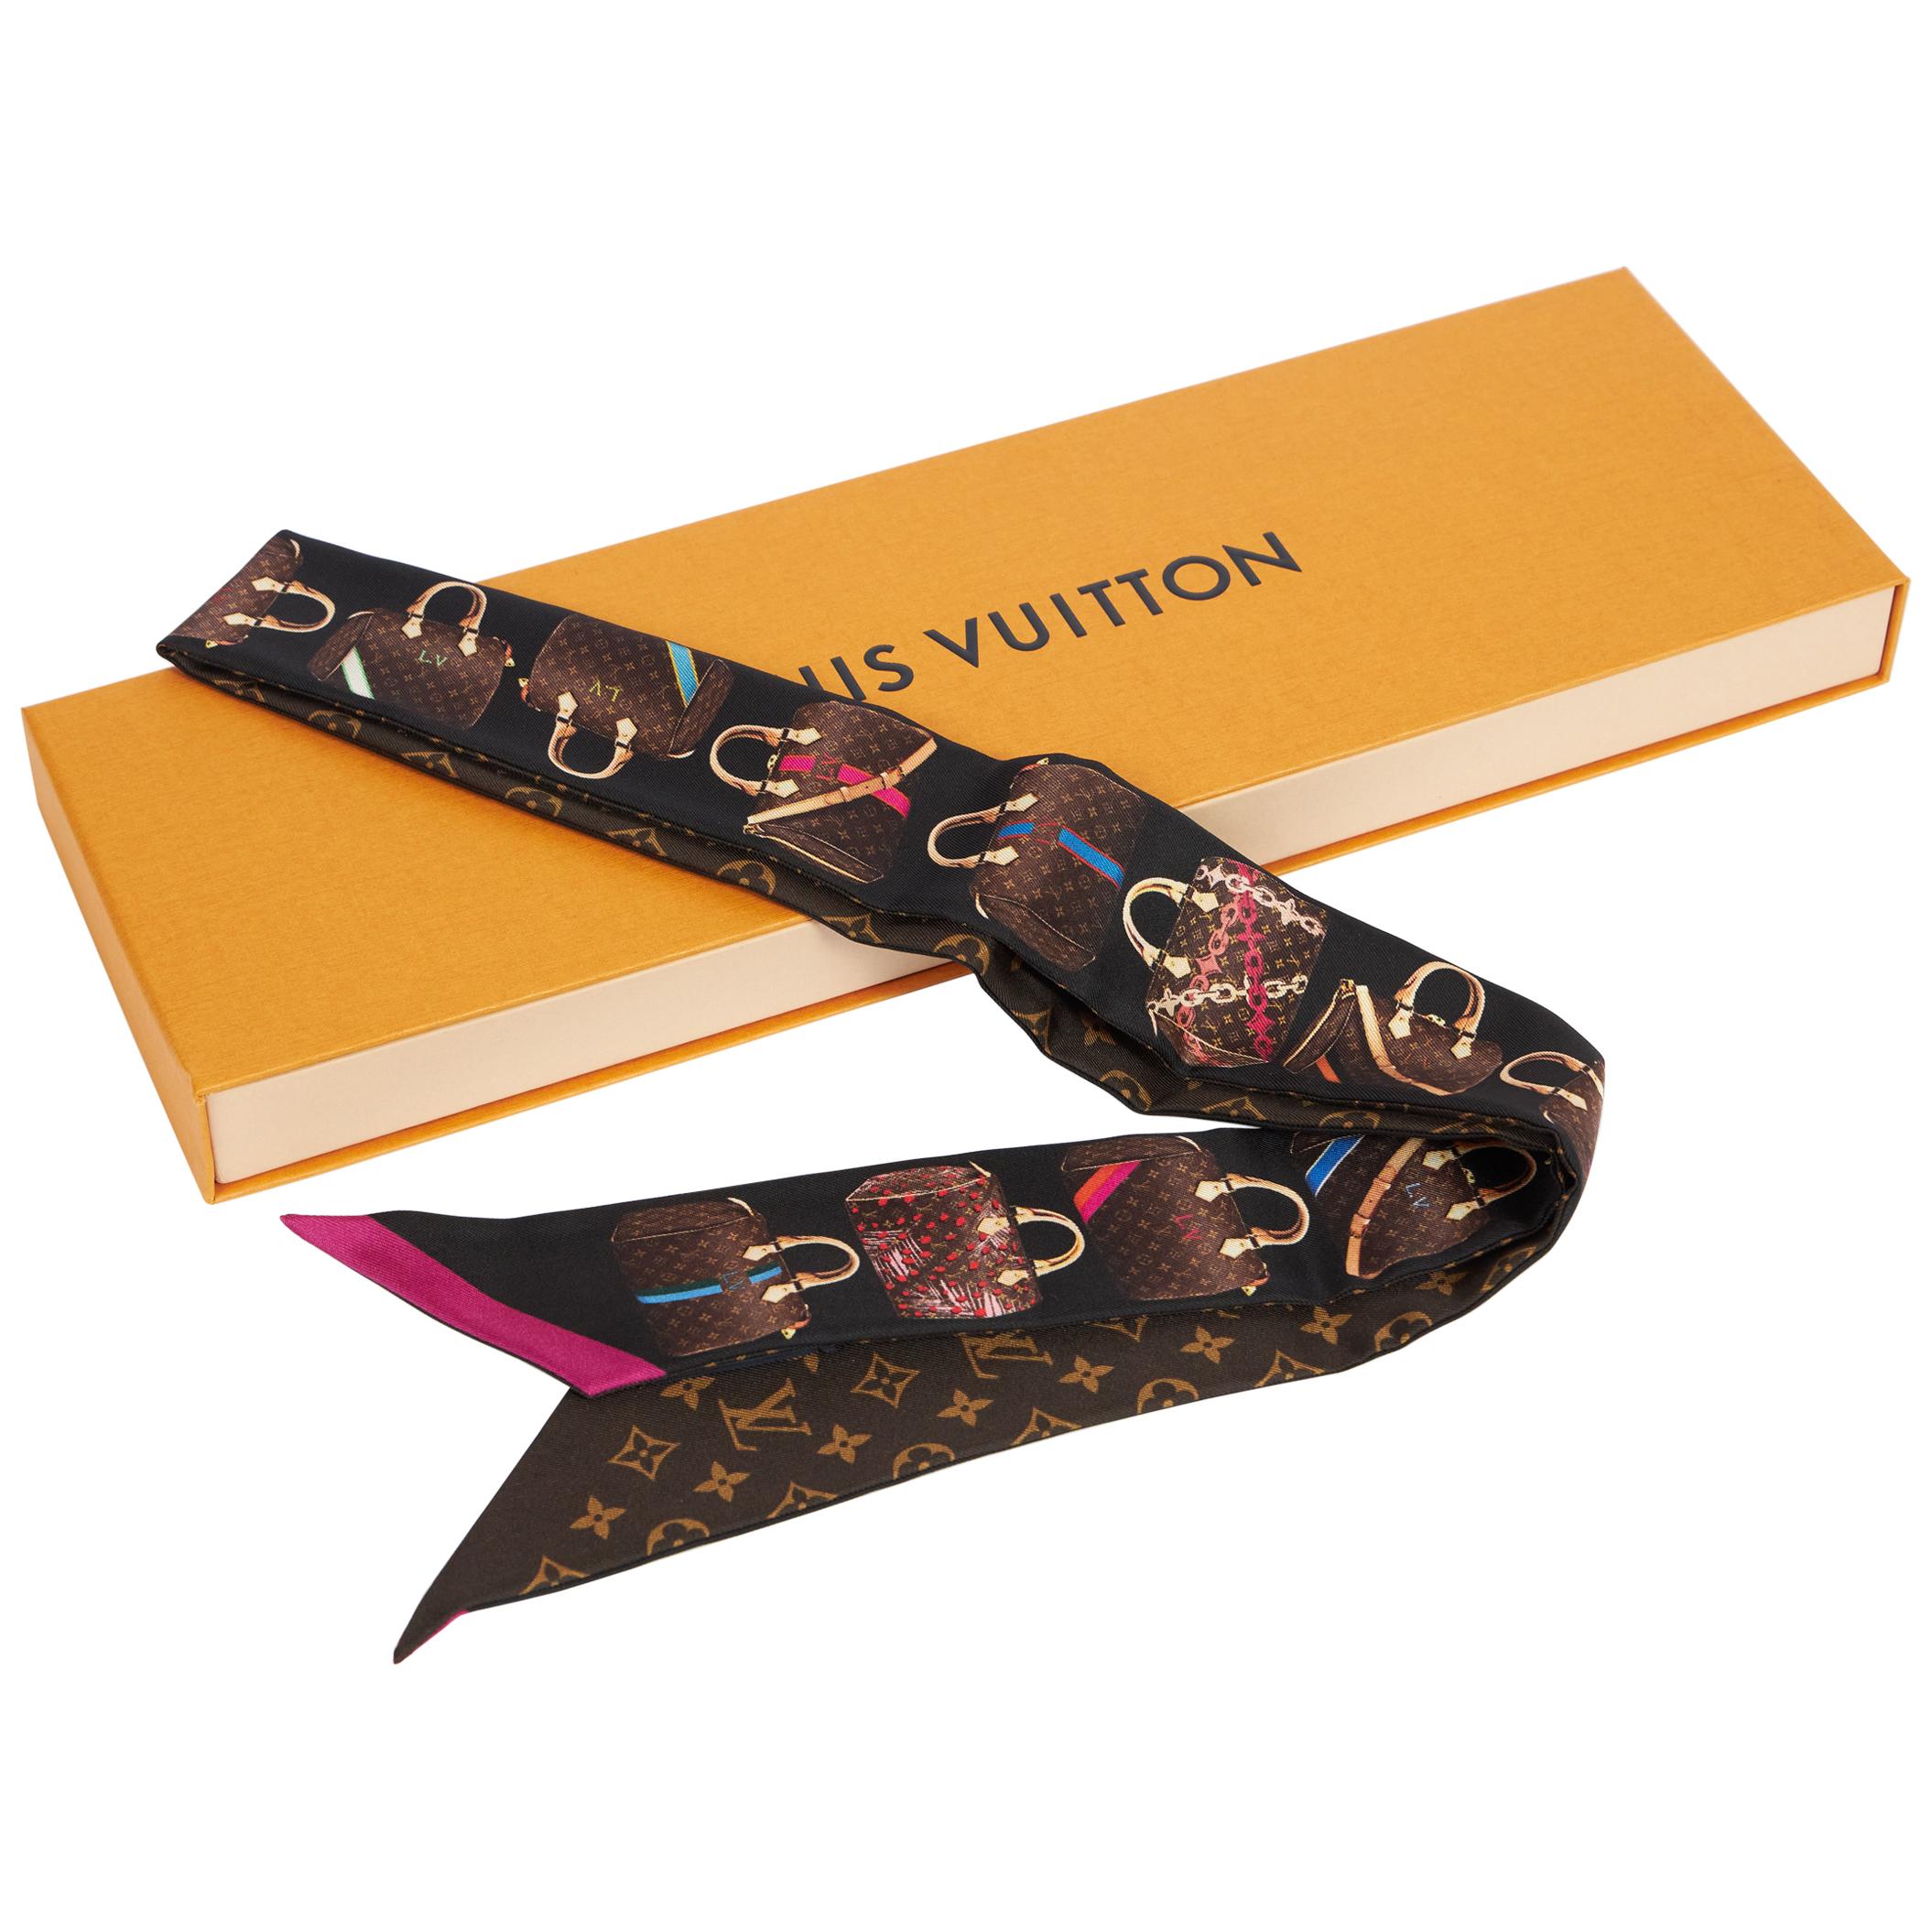 New Louis Vuitton Iconic Speedy Silk Twilly Scarf in Box at